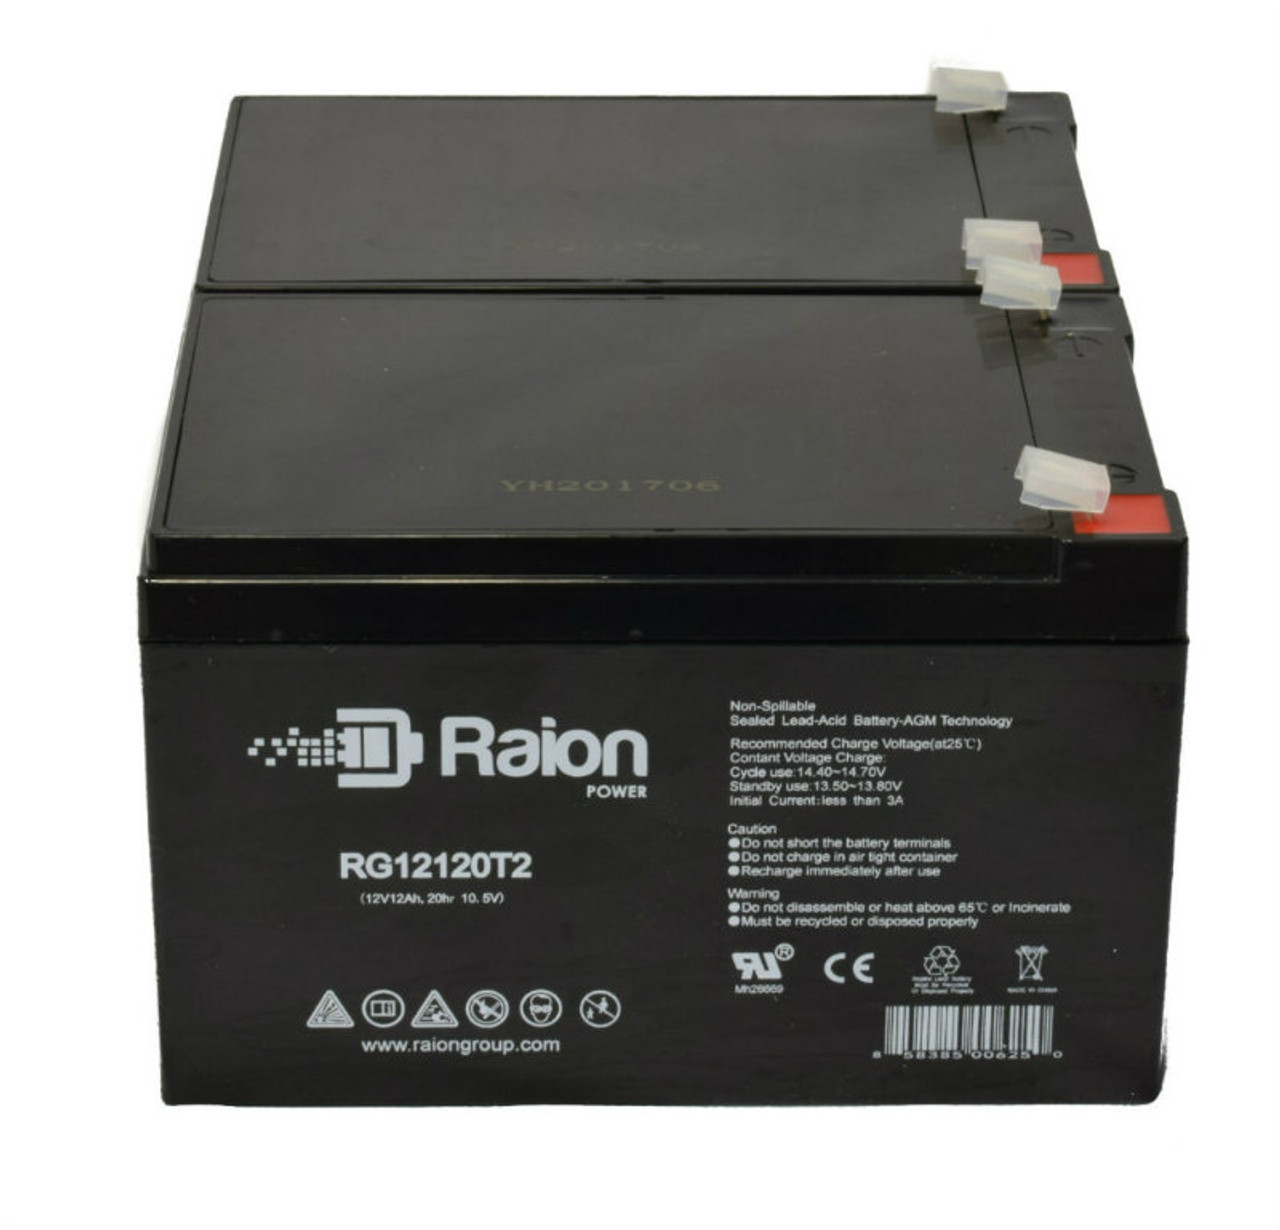 Raion Power 12V 12Ah Non-Spillable Compatible Replacement Battery for Fengri 6-FM-10 - (2 Pack)